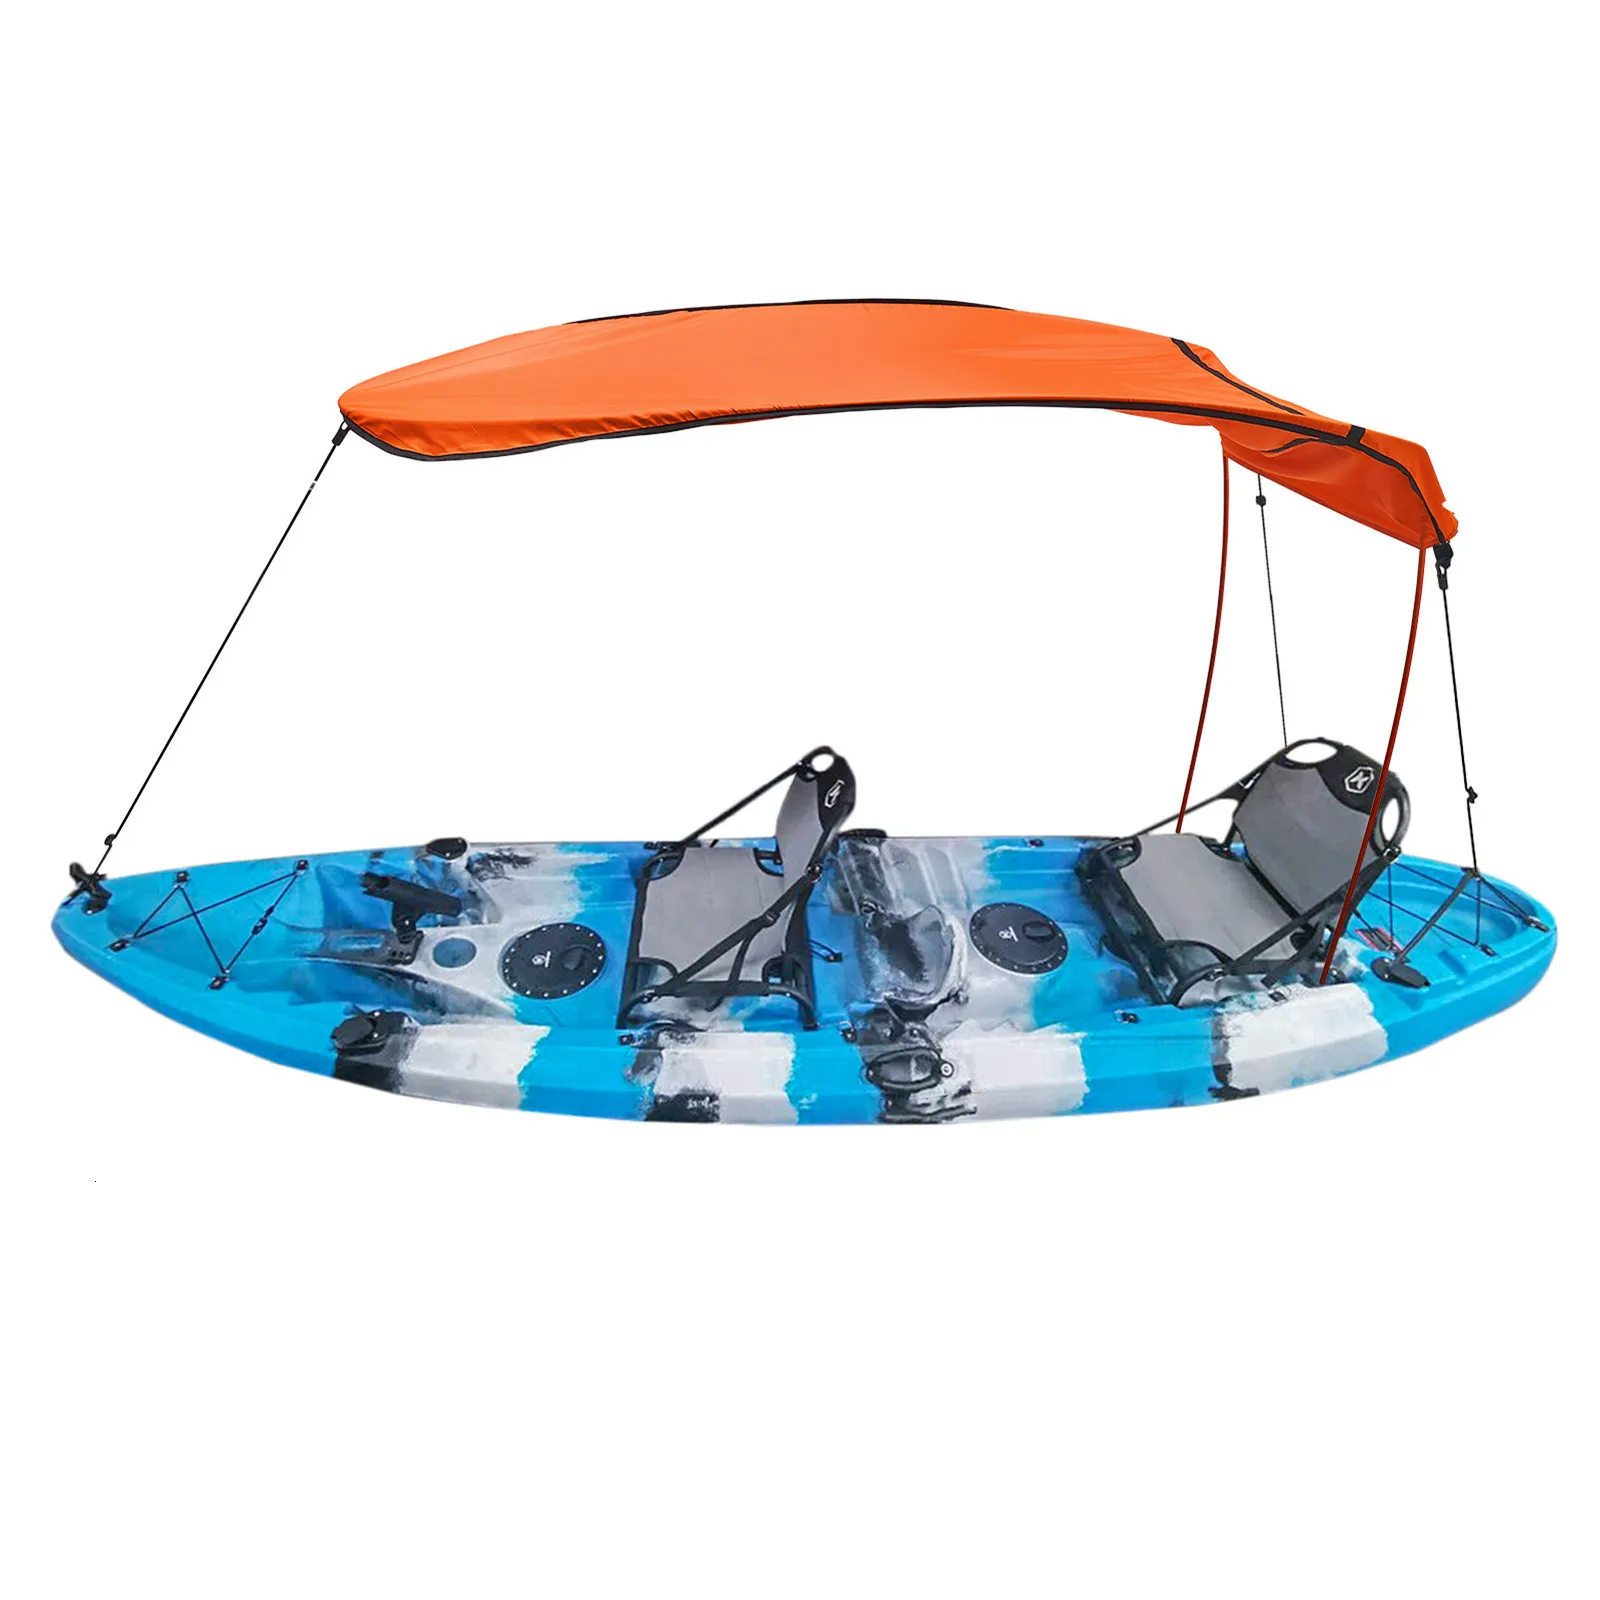 Waterproof Kayak Canopy Canop Sun Shade Top Cover For Boats And Kayaks  Beach Gear And Accessories 230802 From Diao09, $50.4